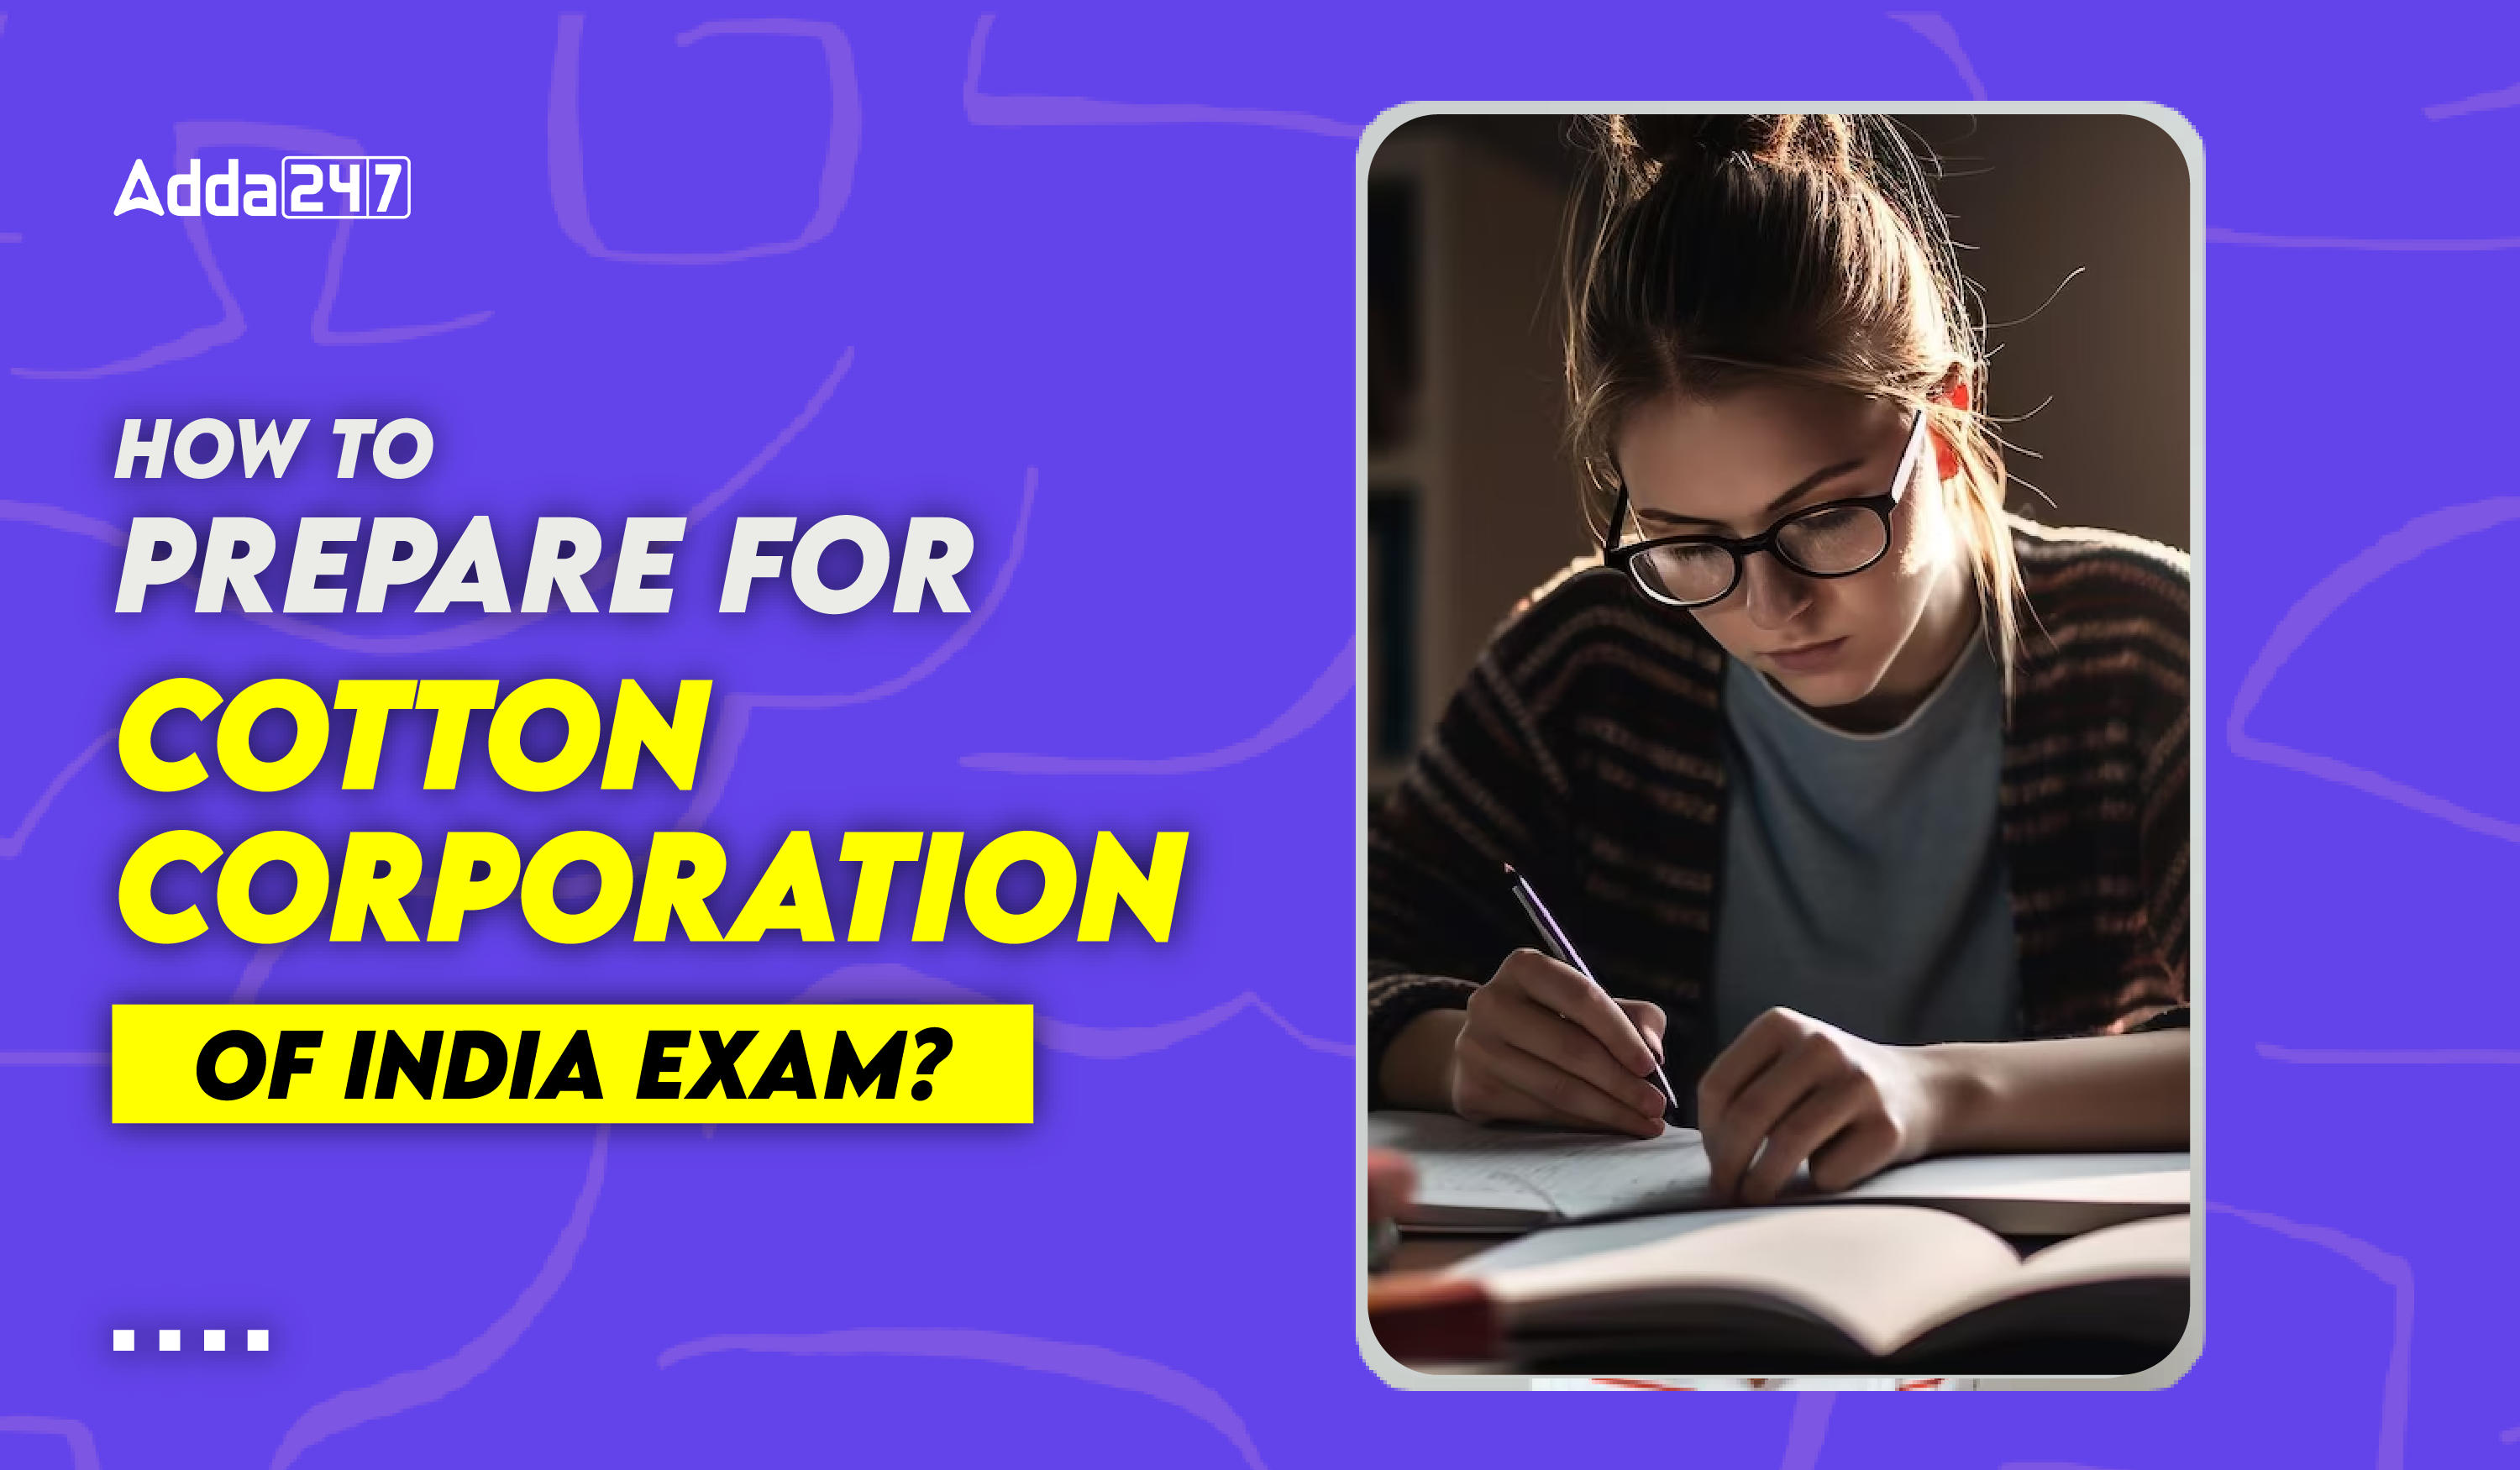 How to Prepare For Cotton Corporation of India Exam